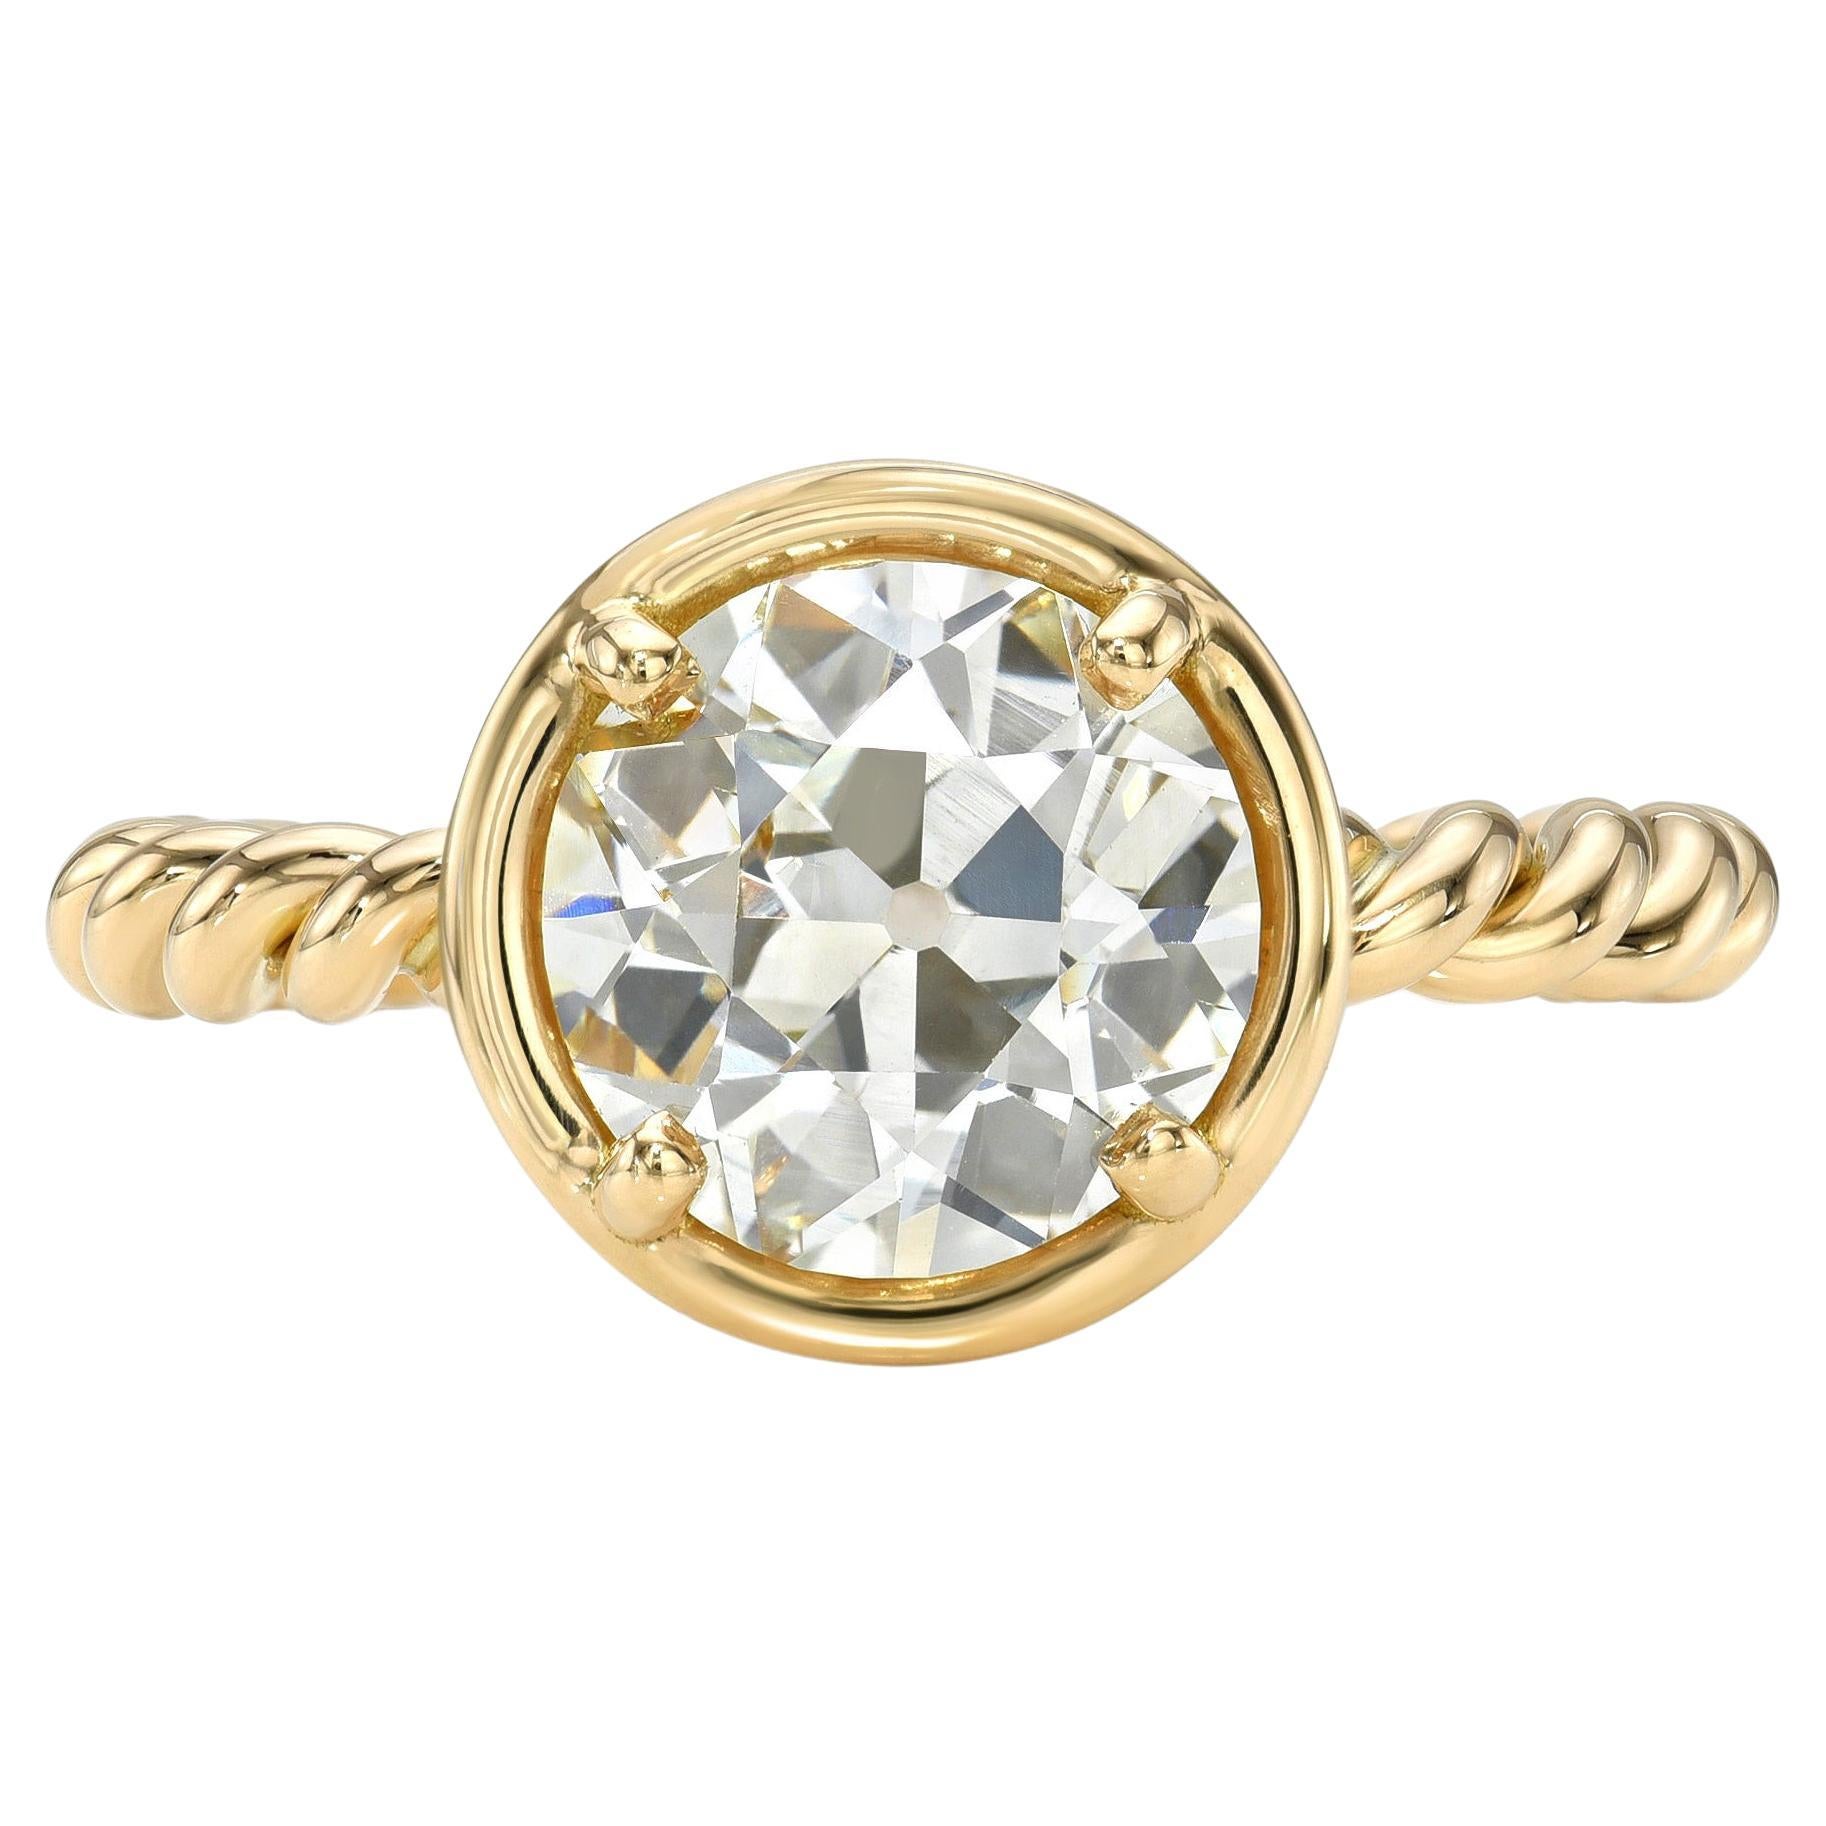 Handcrafted Lara Old European Cut Diamond Ring by Single Stone For Sale